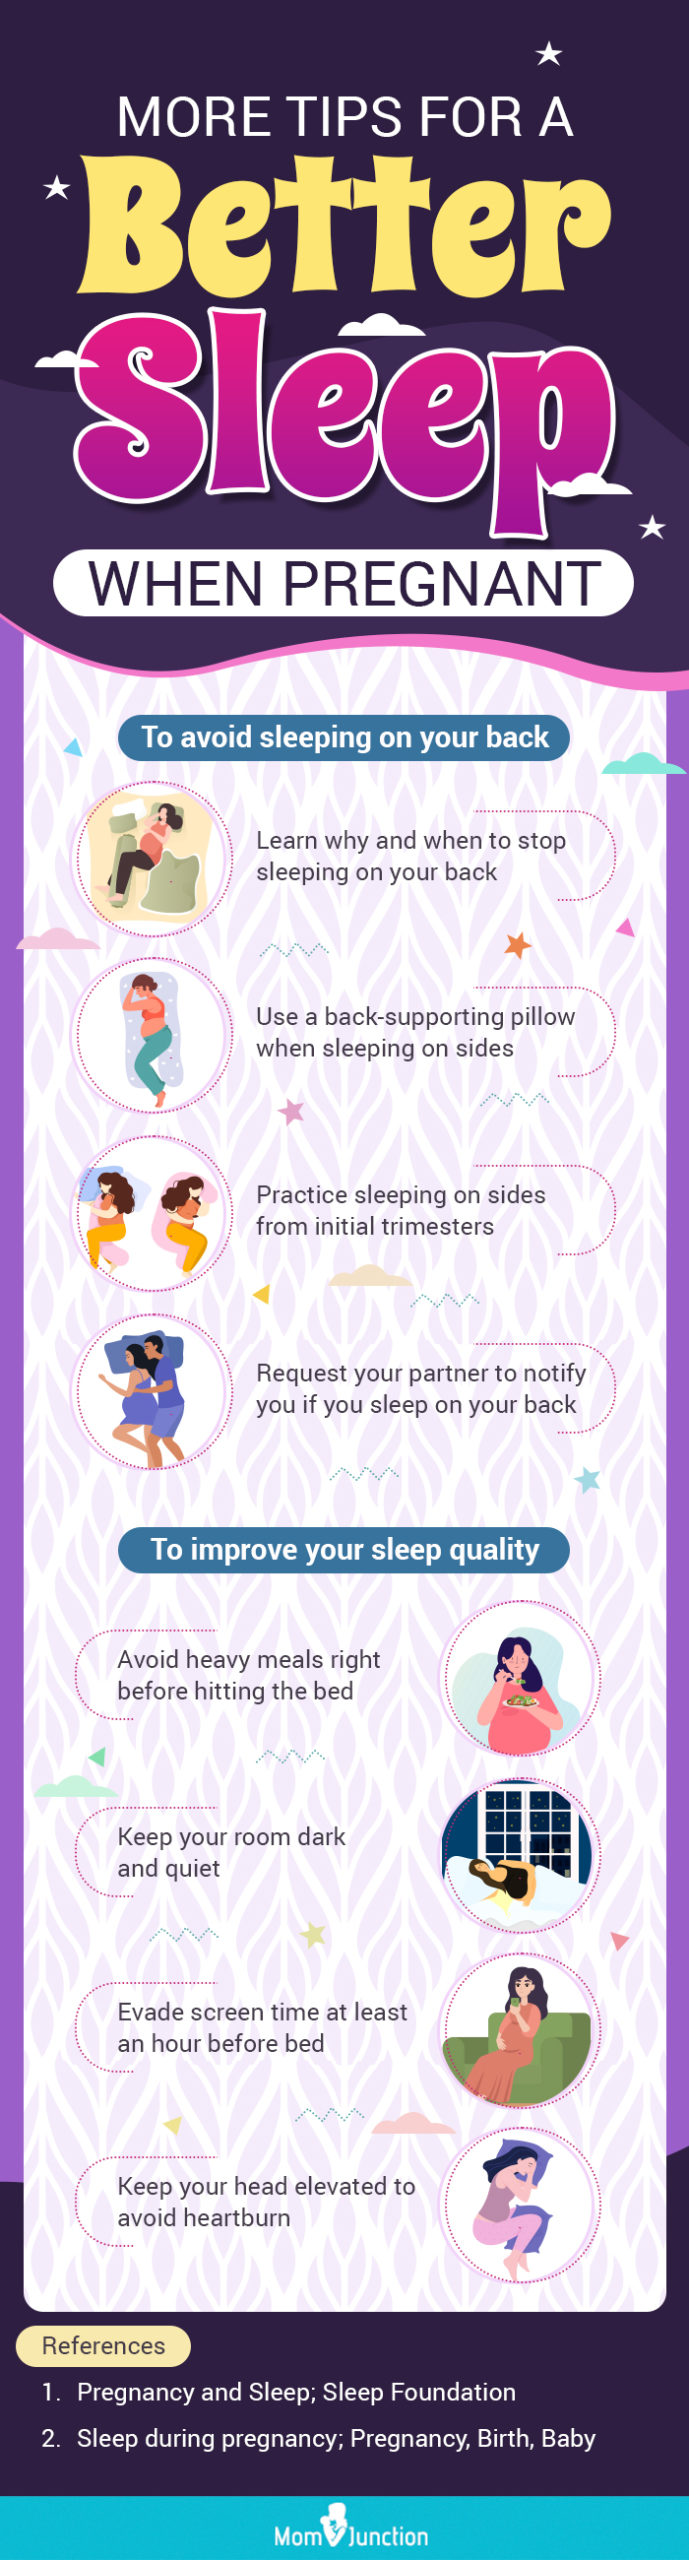 more tips for a better sleep when pregnant (infographic)